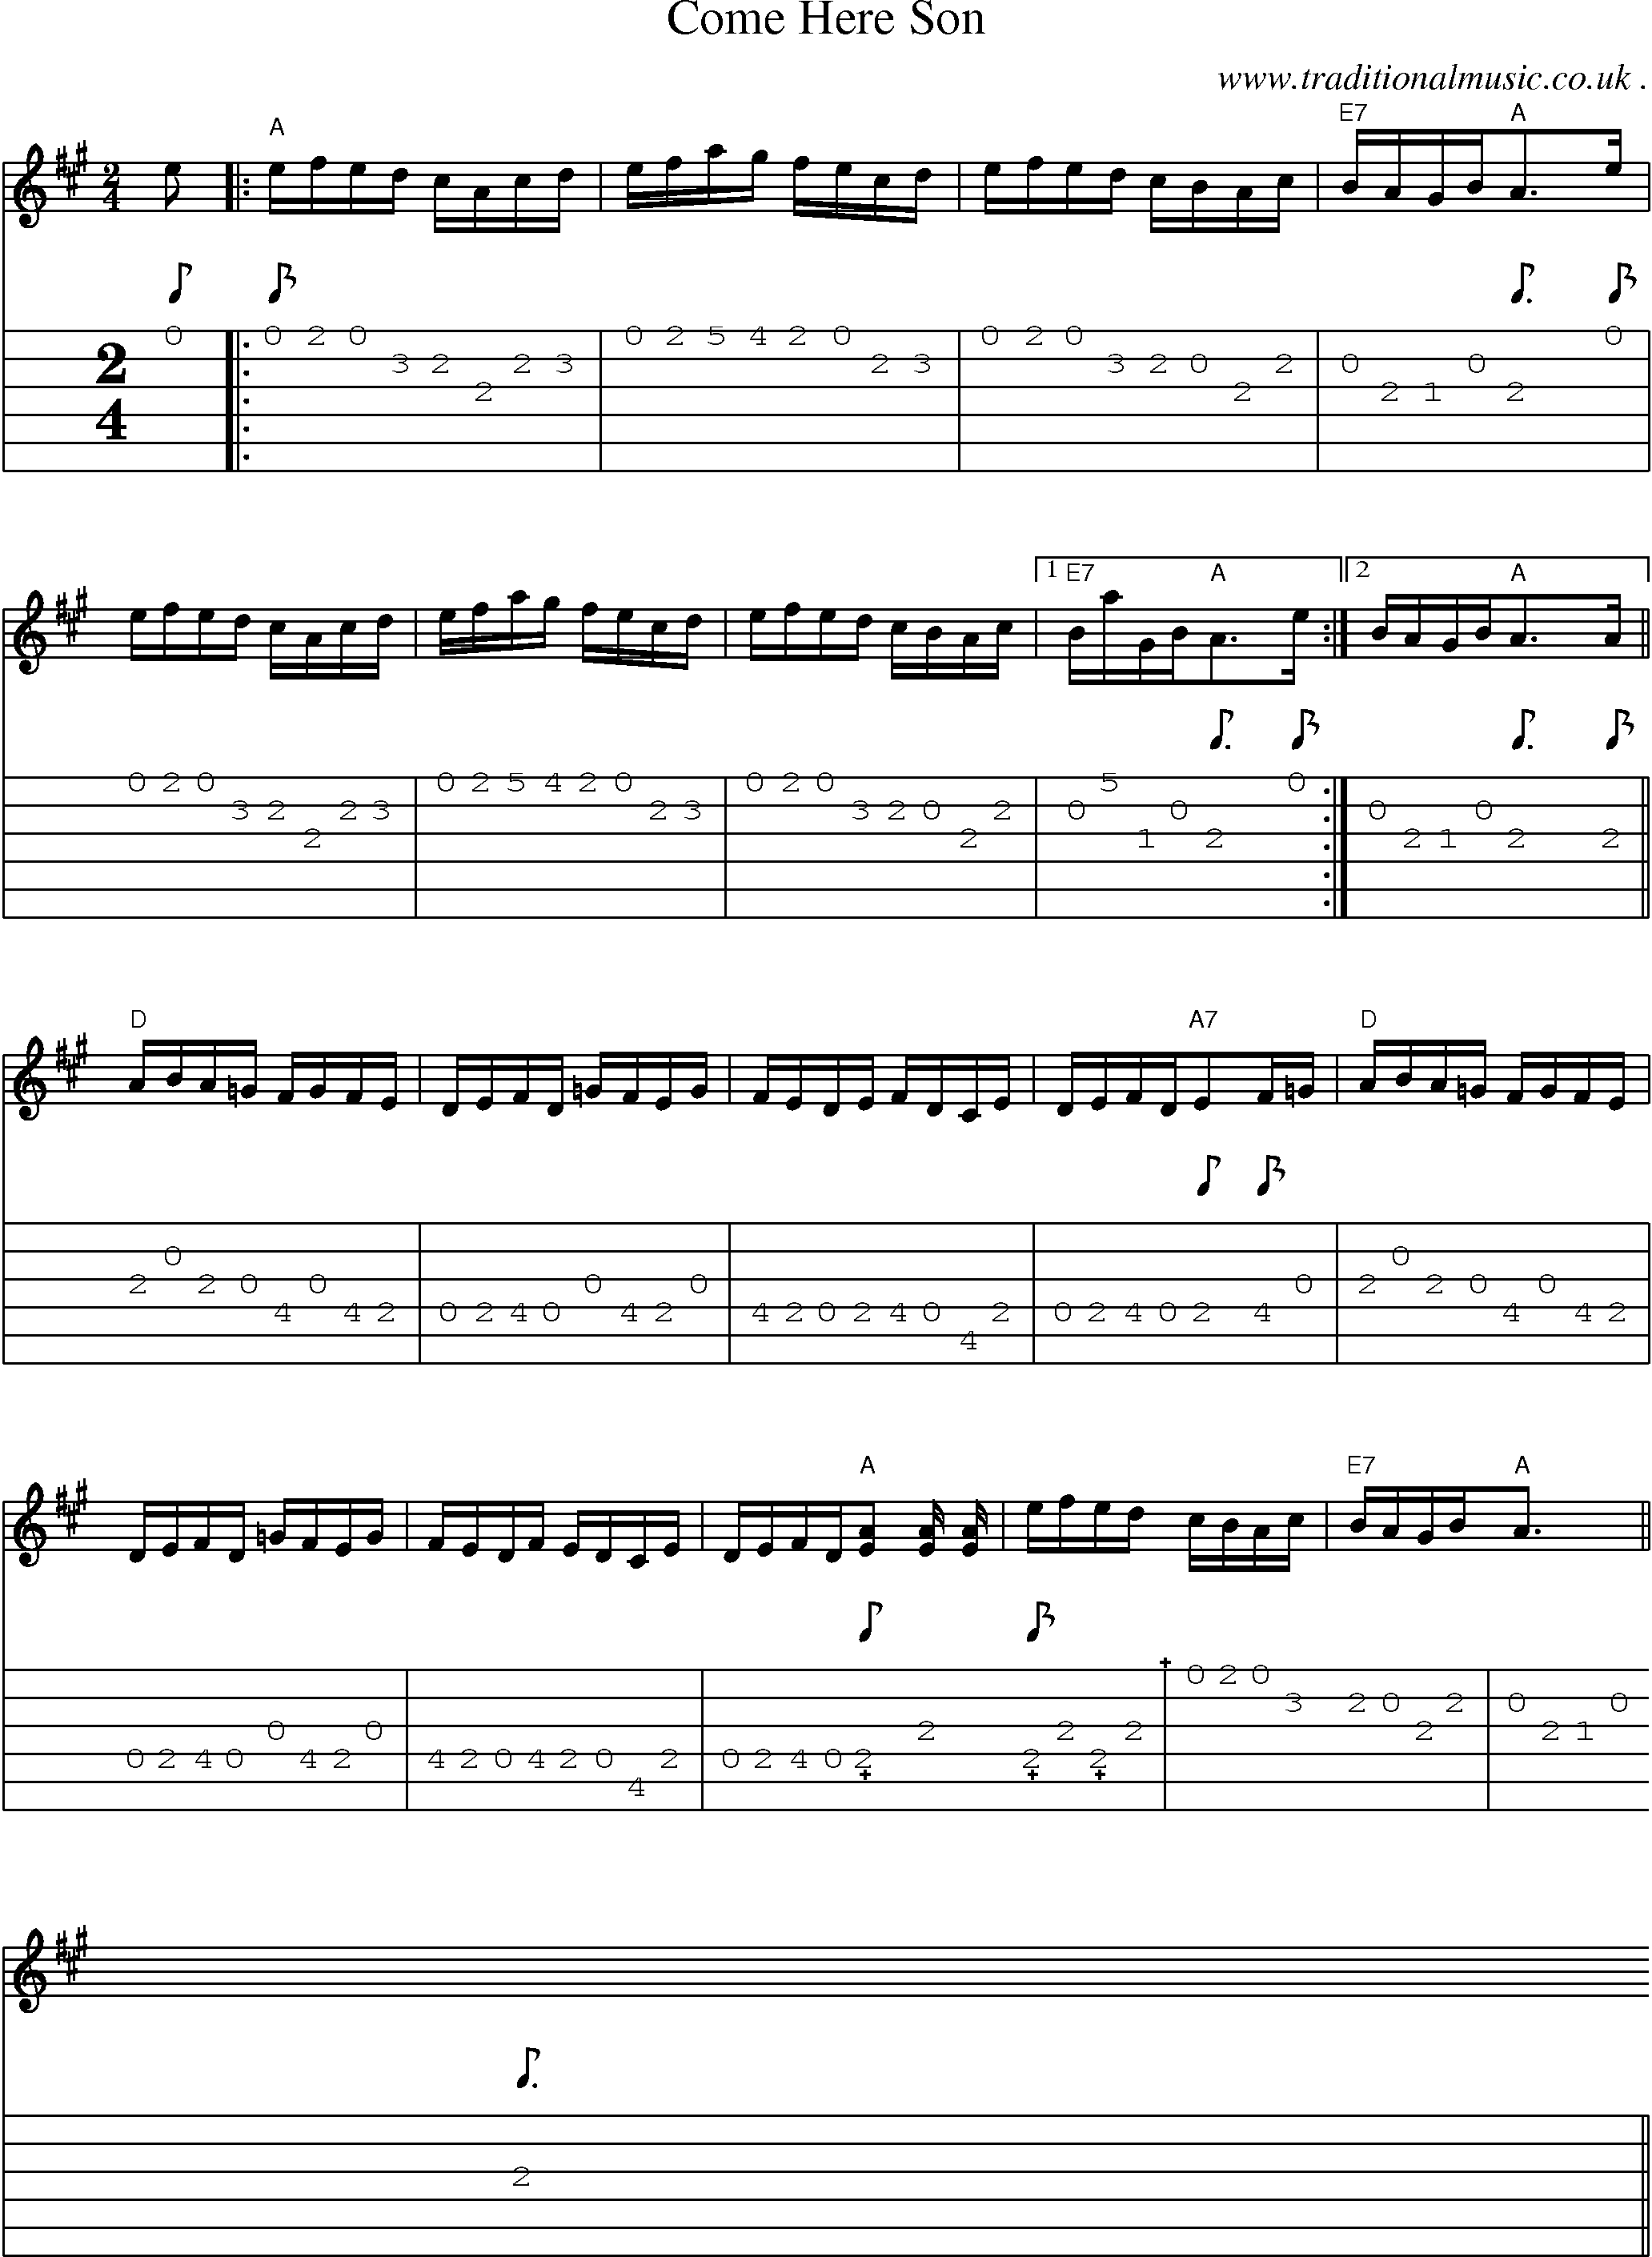 Sheet-Music and Guitar Tabs for Come Here Son